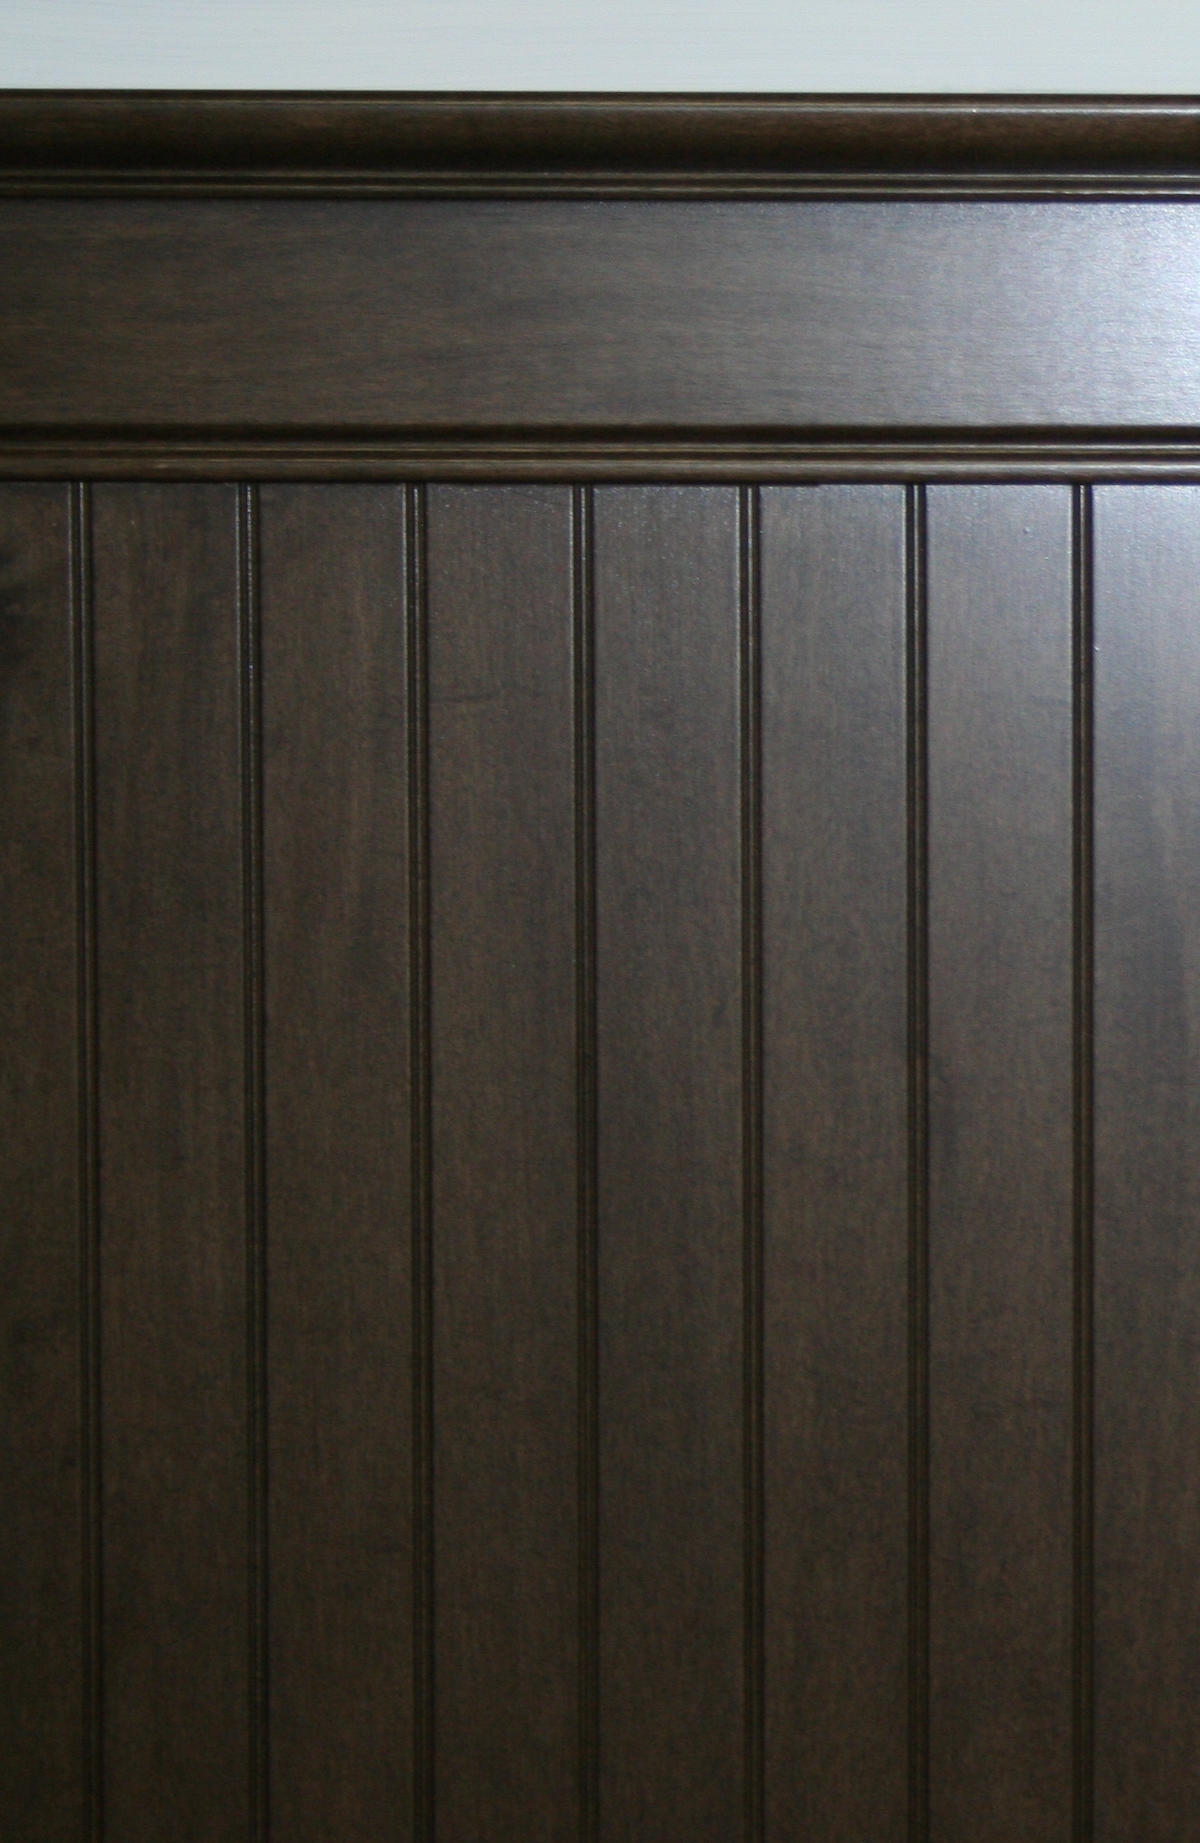 A close up look at interior beadboard made up of stained maple hardwood